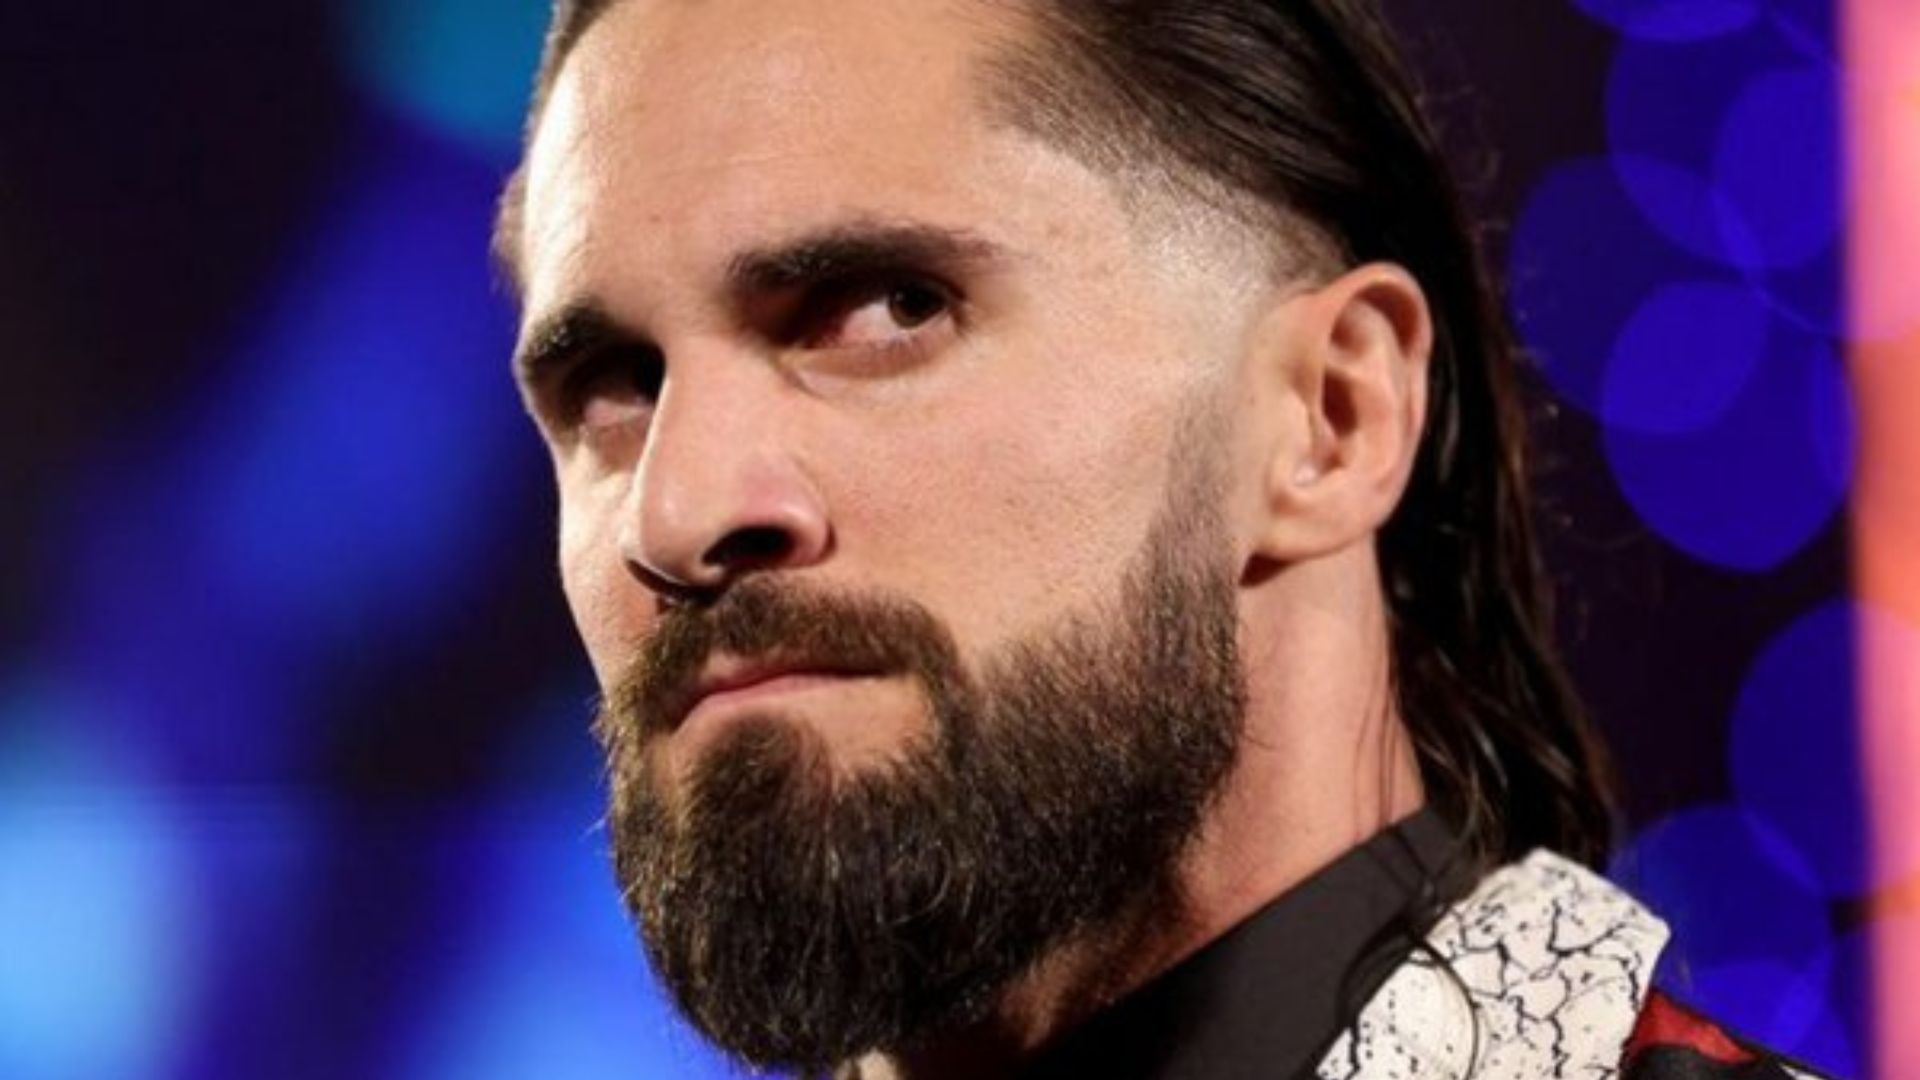 Seth Rollins was namedropped by a WWE star in a recent promo